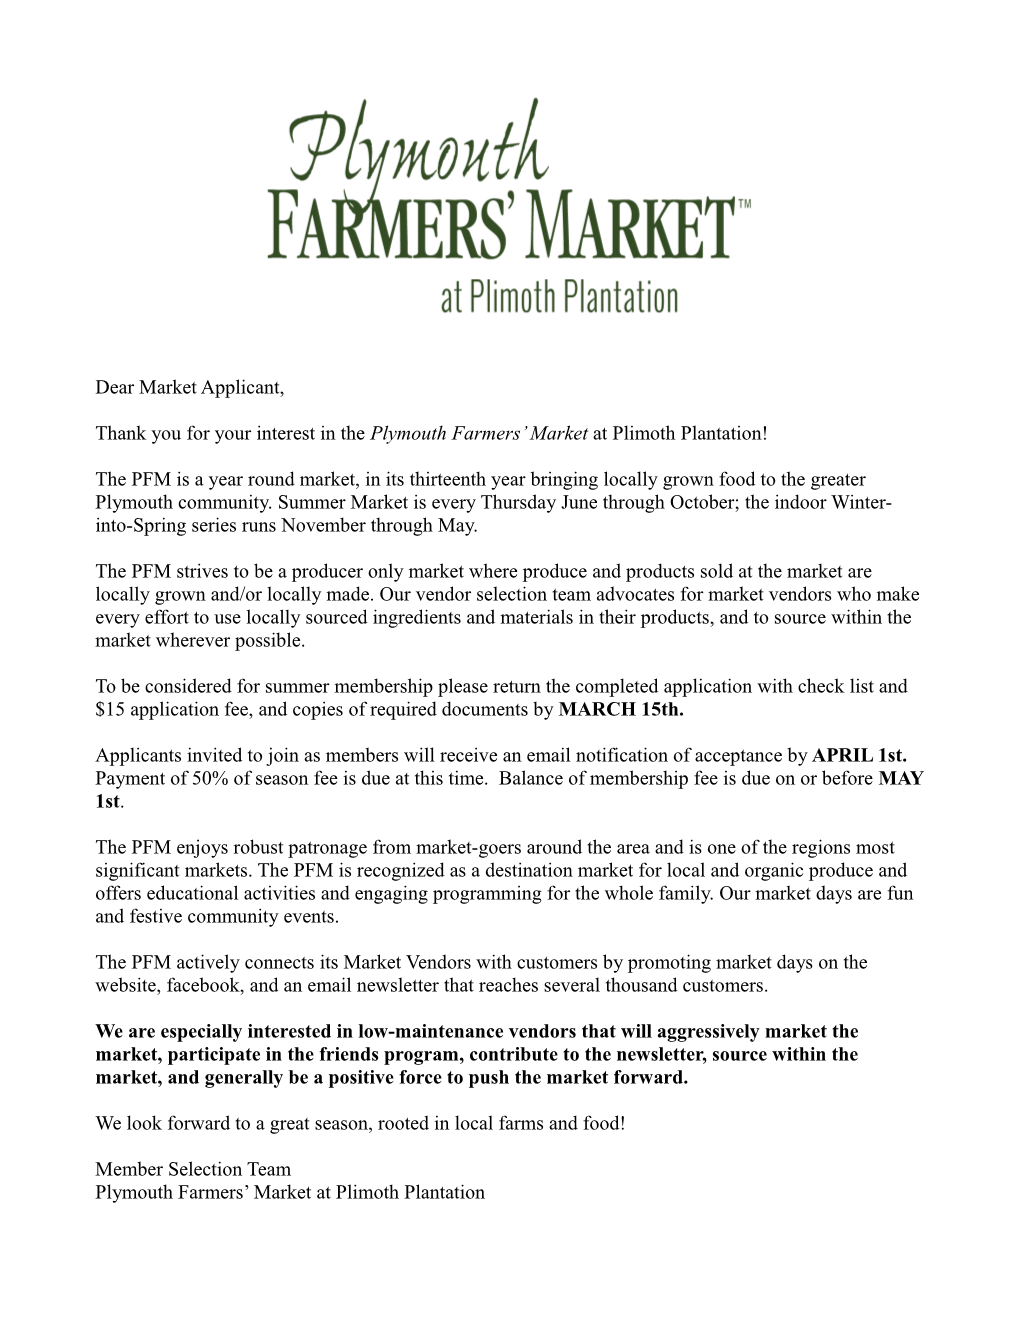 Thank You for Your Interest in the Plymouth Farmers Market at Plimoth Plantation!